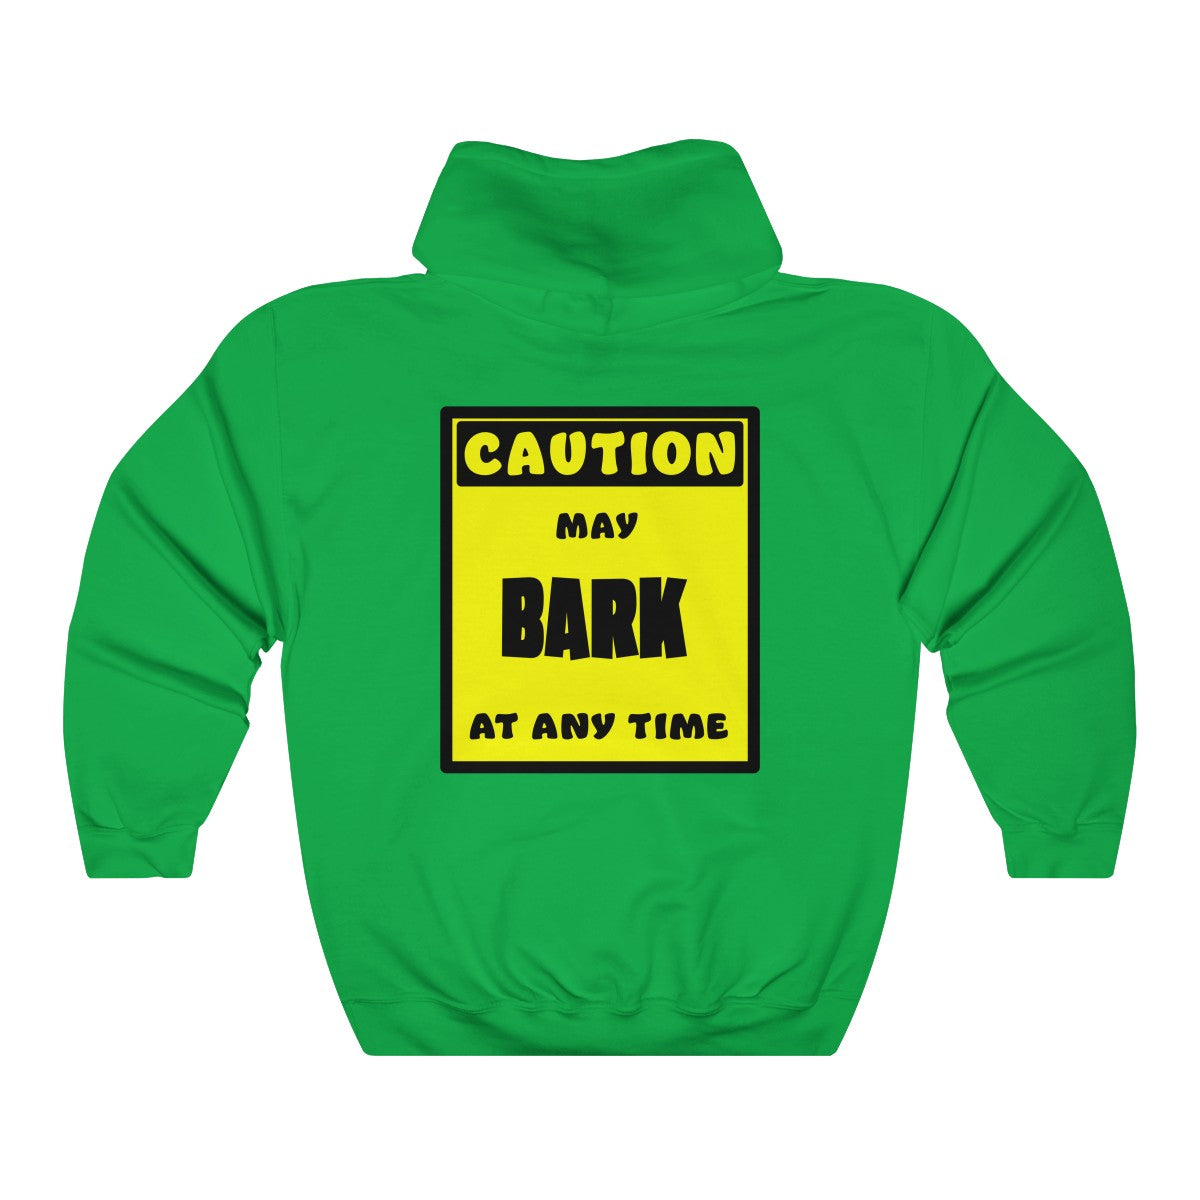 CAUTION! May BARK at any time! - Hoodie Hoodie AFLT-Whootorca Green S 